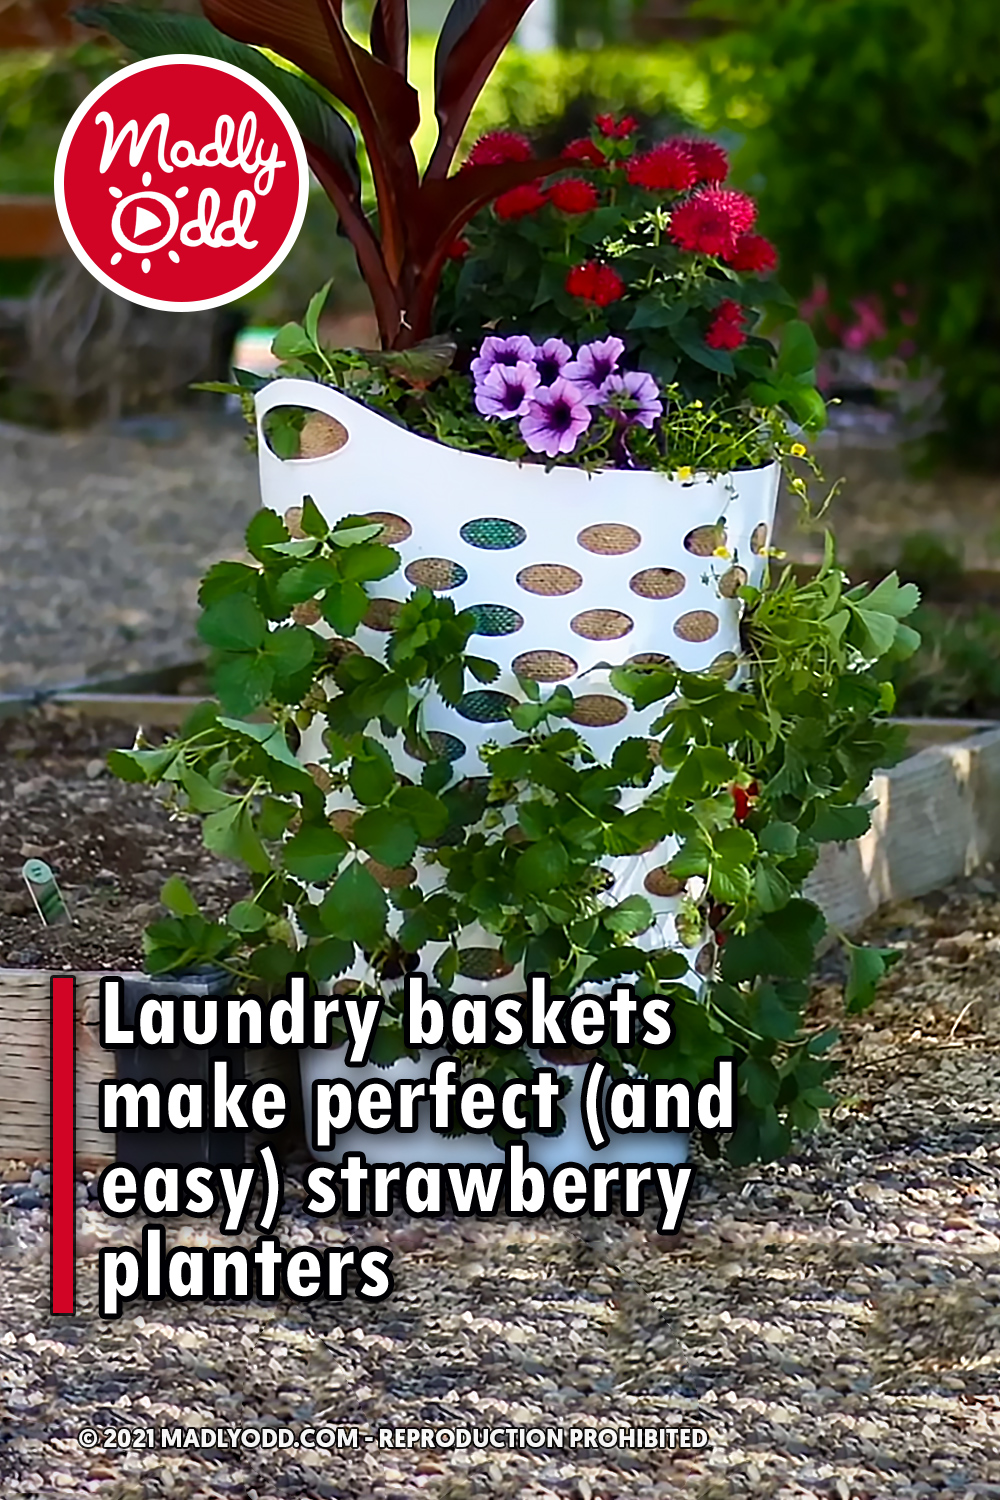 Laundry baskets make perfect (and easy) strawberry planters